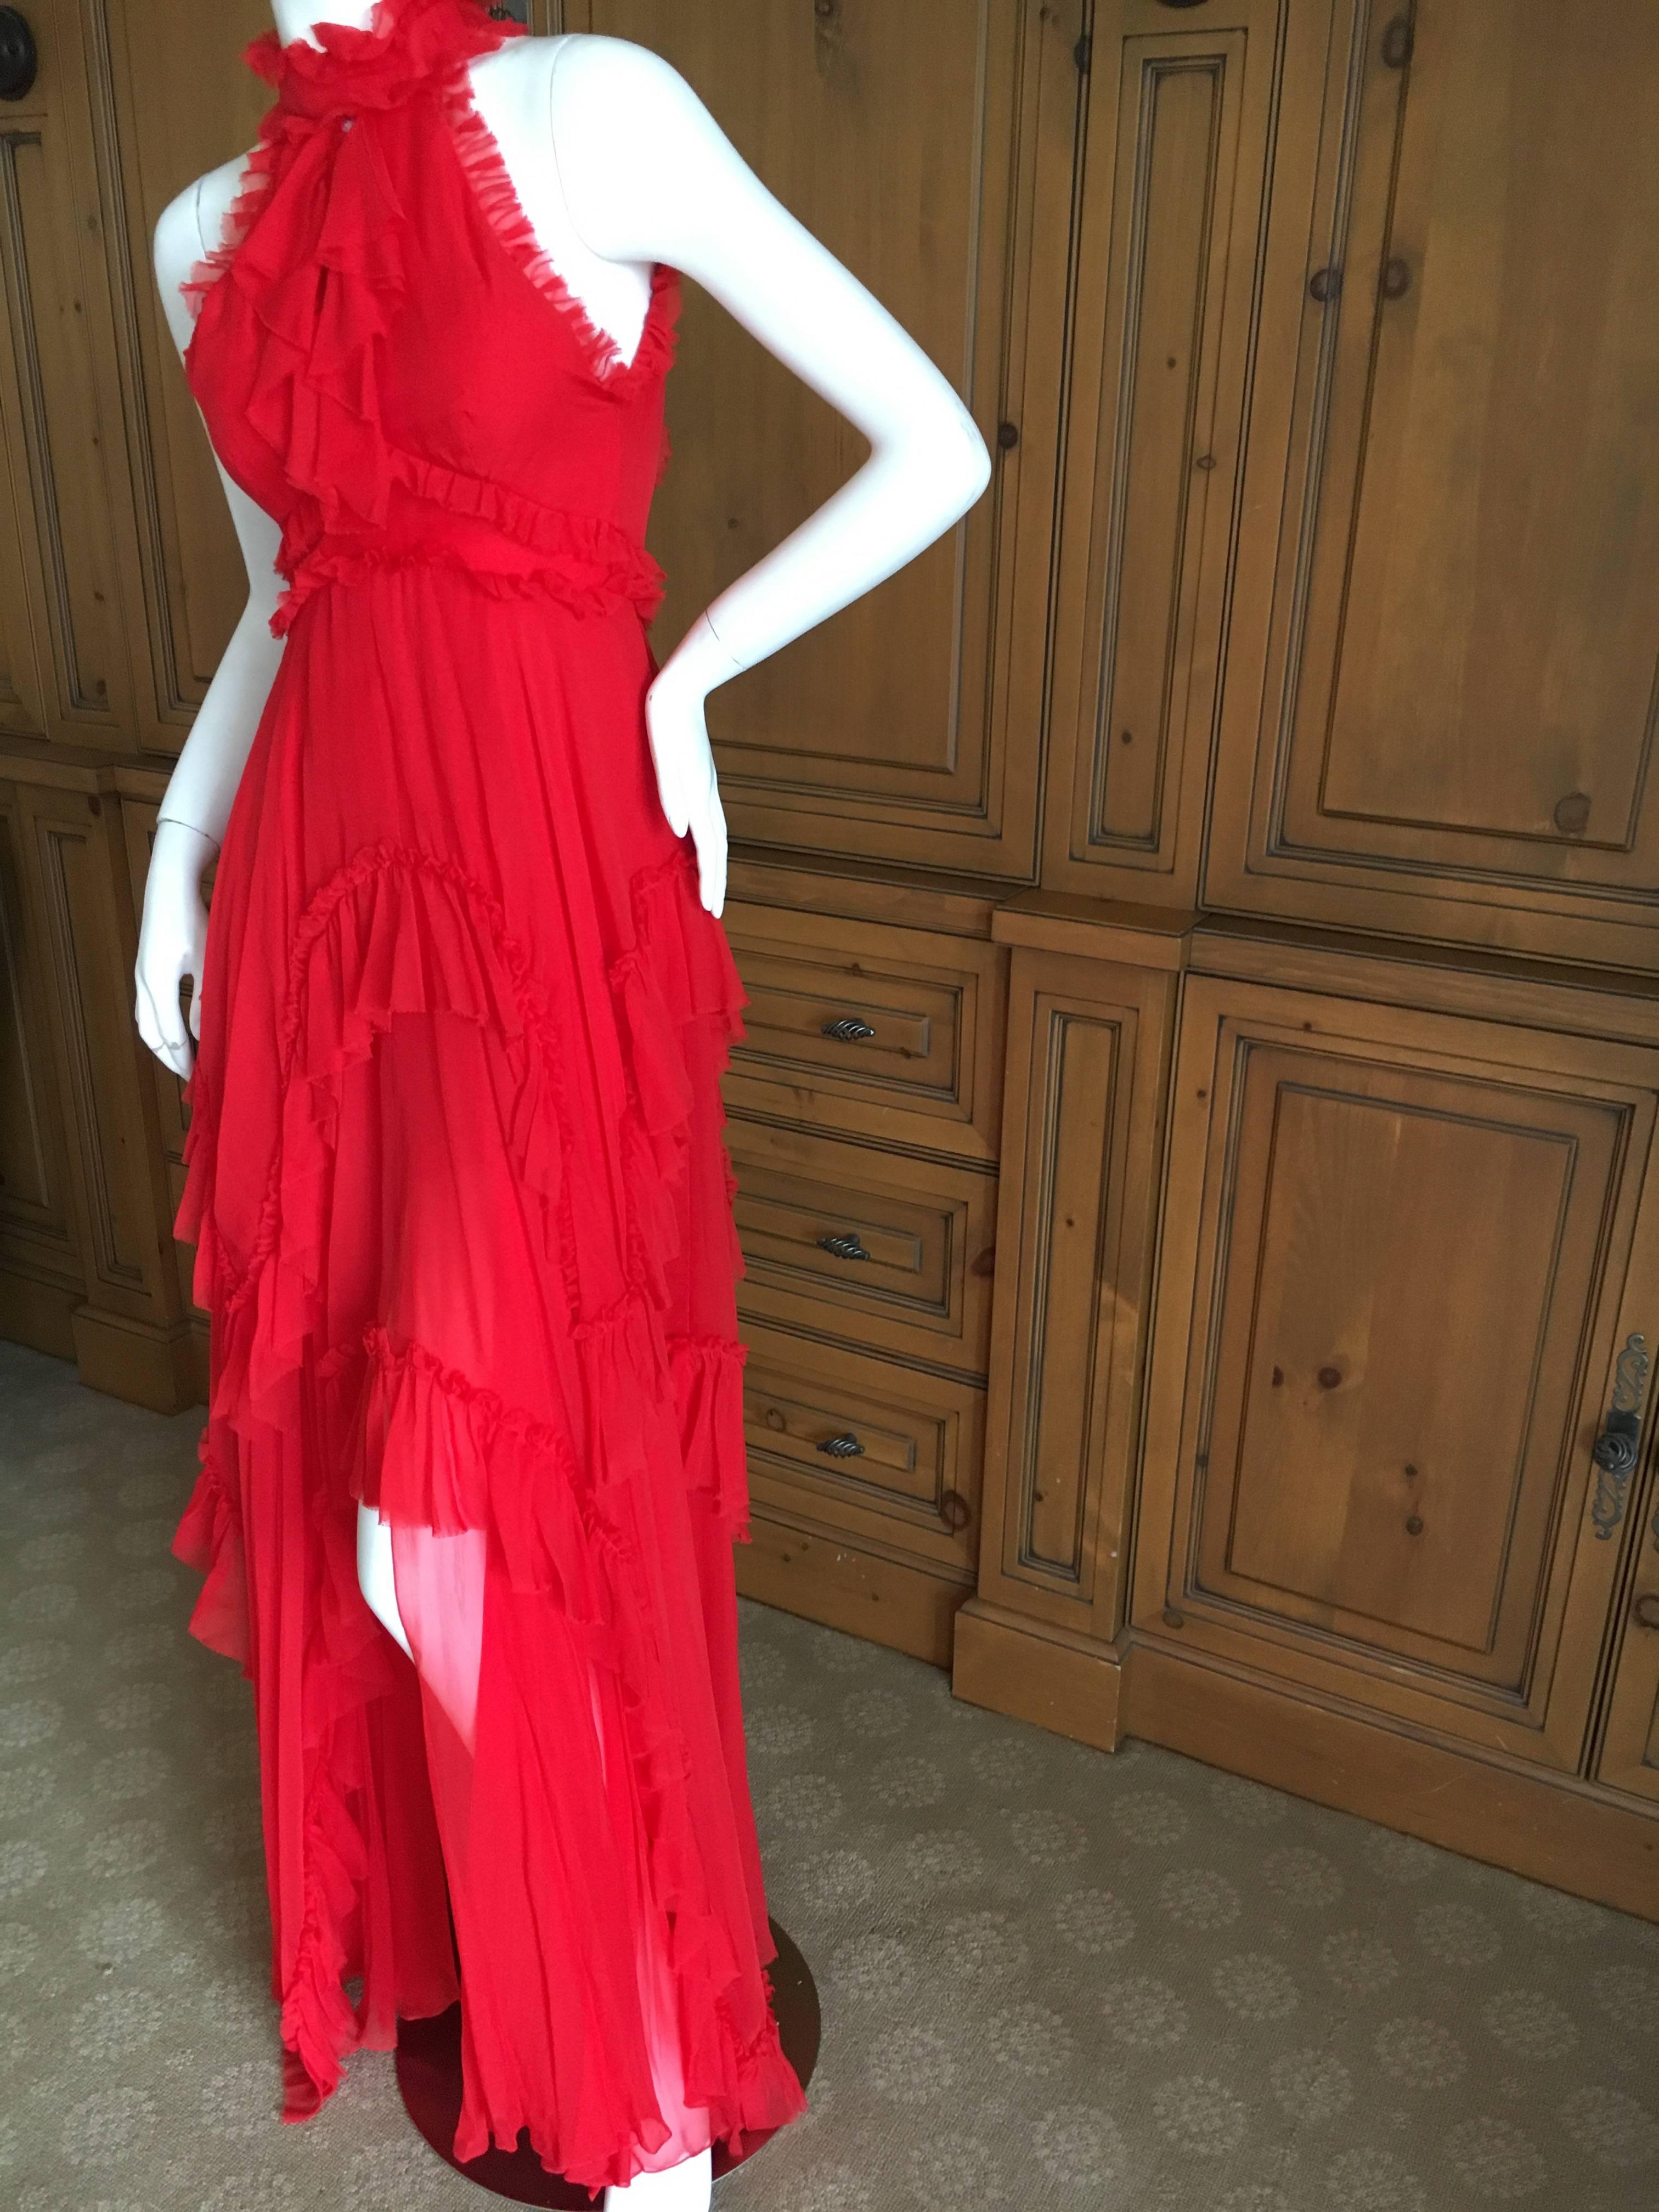 Emelio Pucci Scarlet Silk Ruffled Halter Dress  In Excellent Condition For Sale In Cloverdale, CA